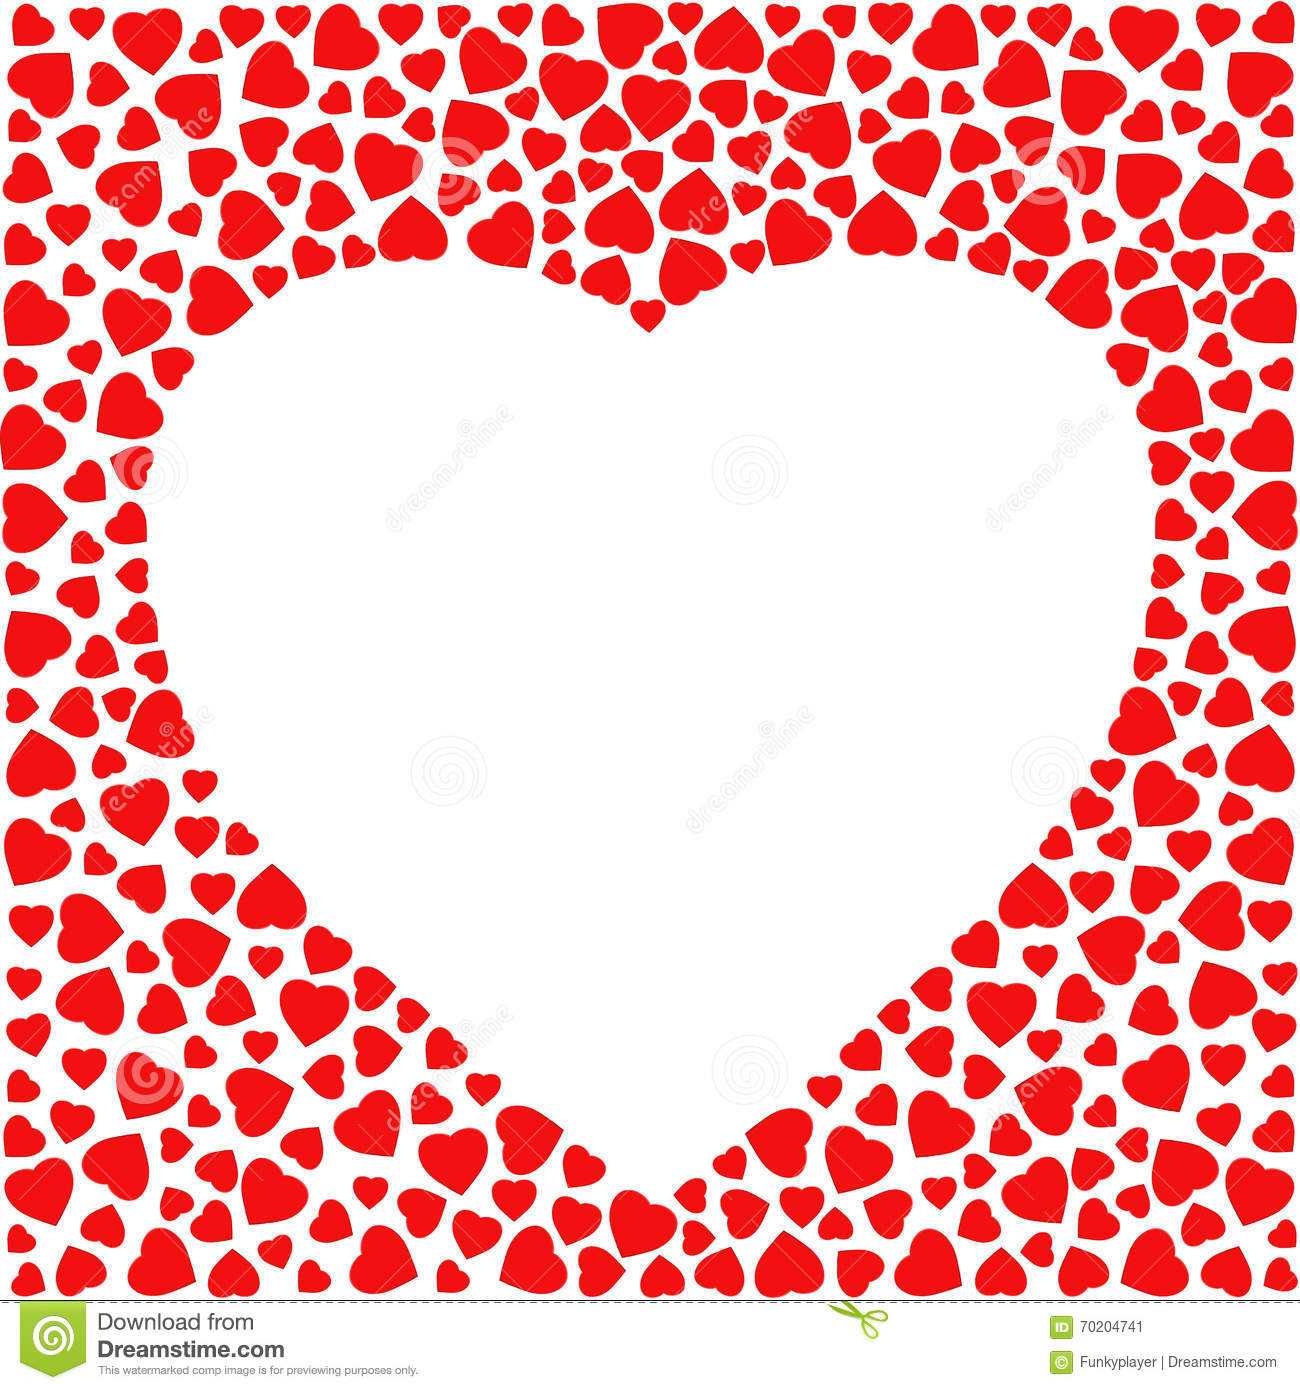 Border With Red Hearts. Greeting Card Design Template For Small Greeting Card Template